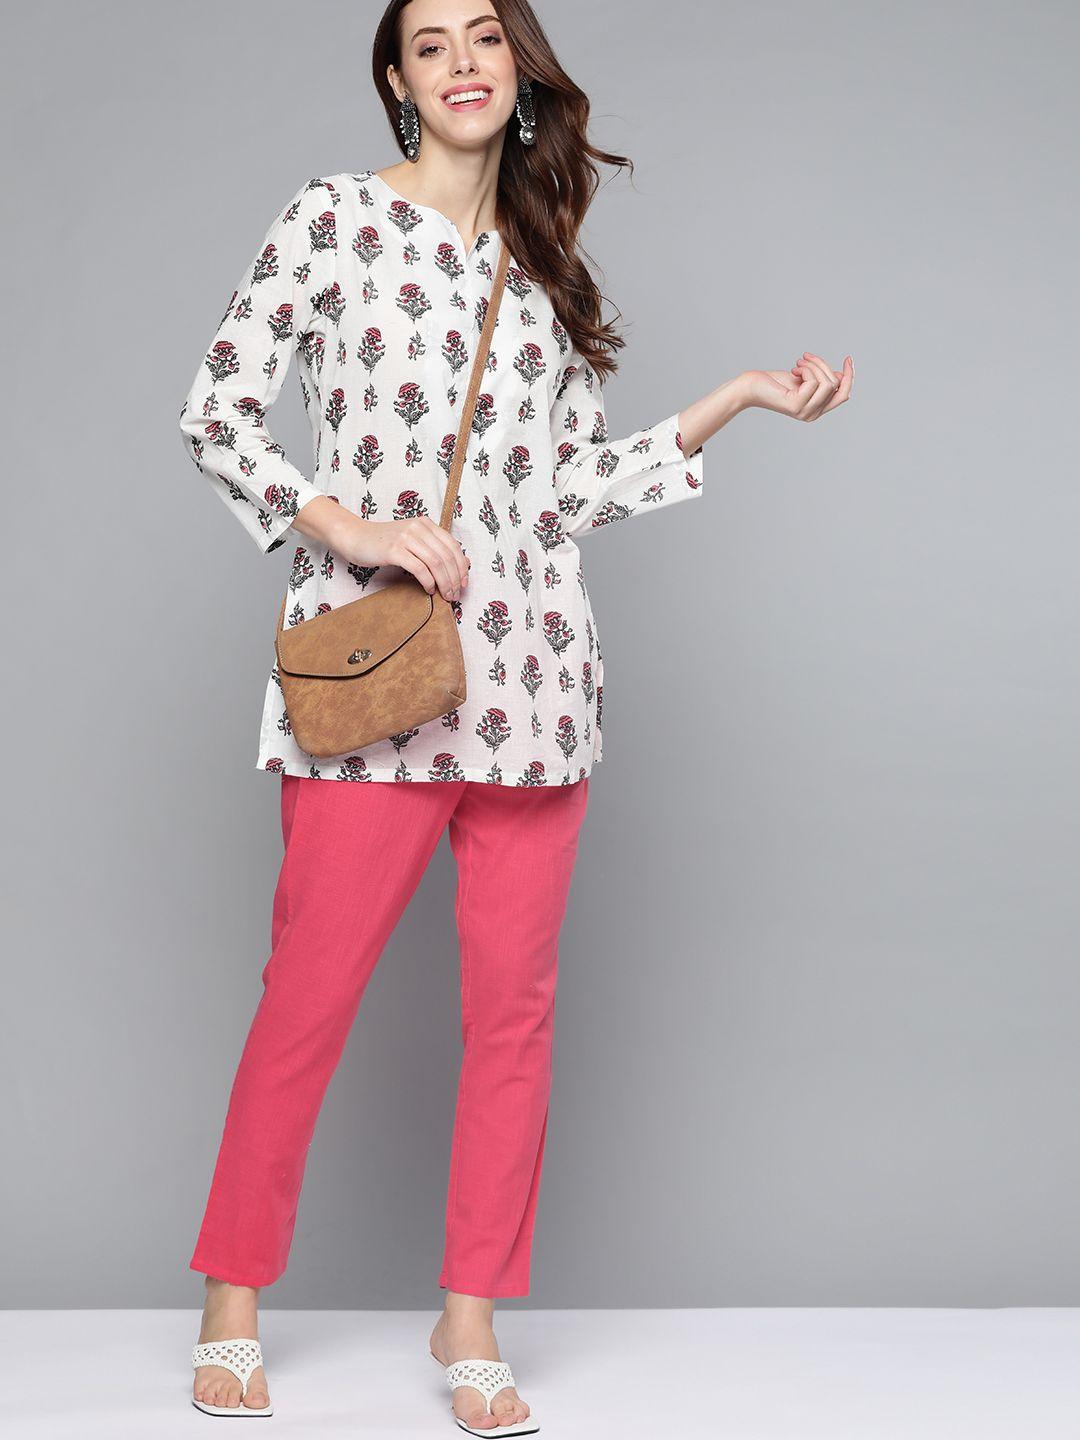 here&now-white-&-pink-ethnic-motifs-printed-pure-cotton-kurti